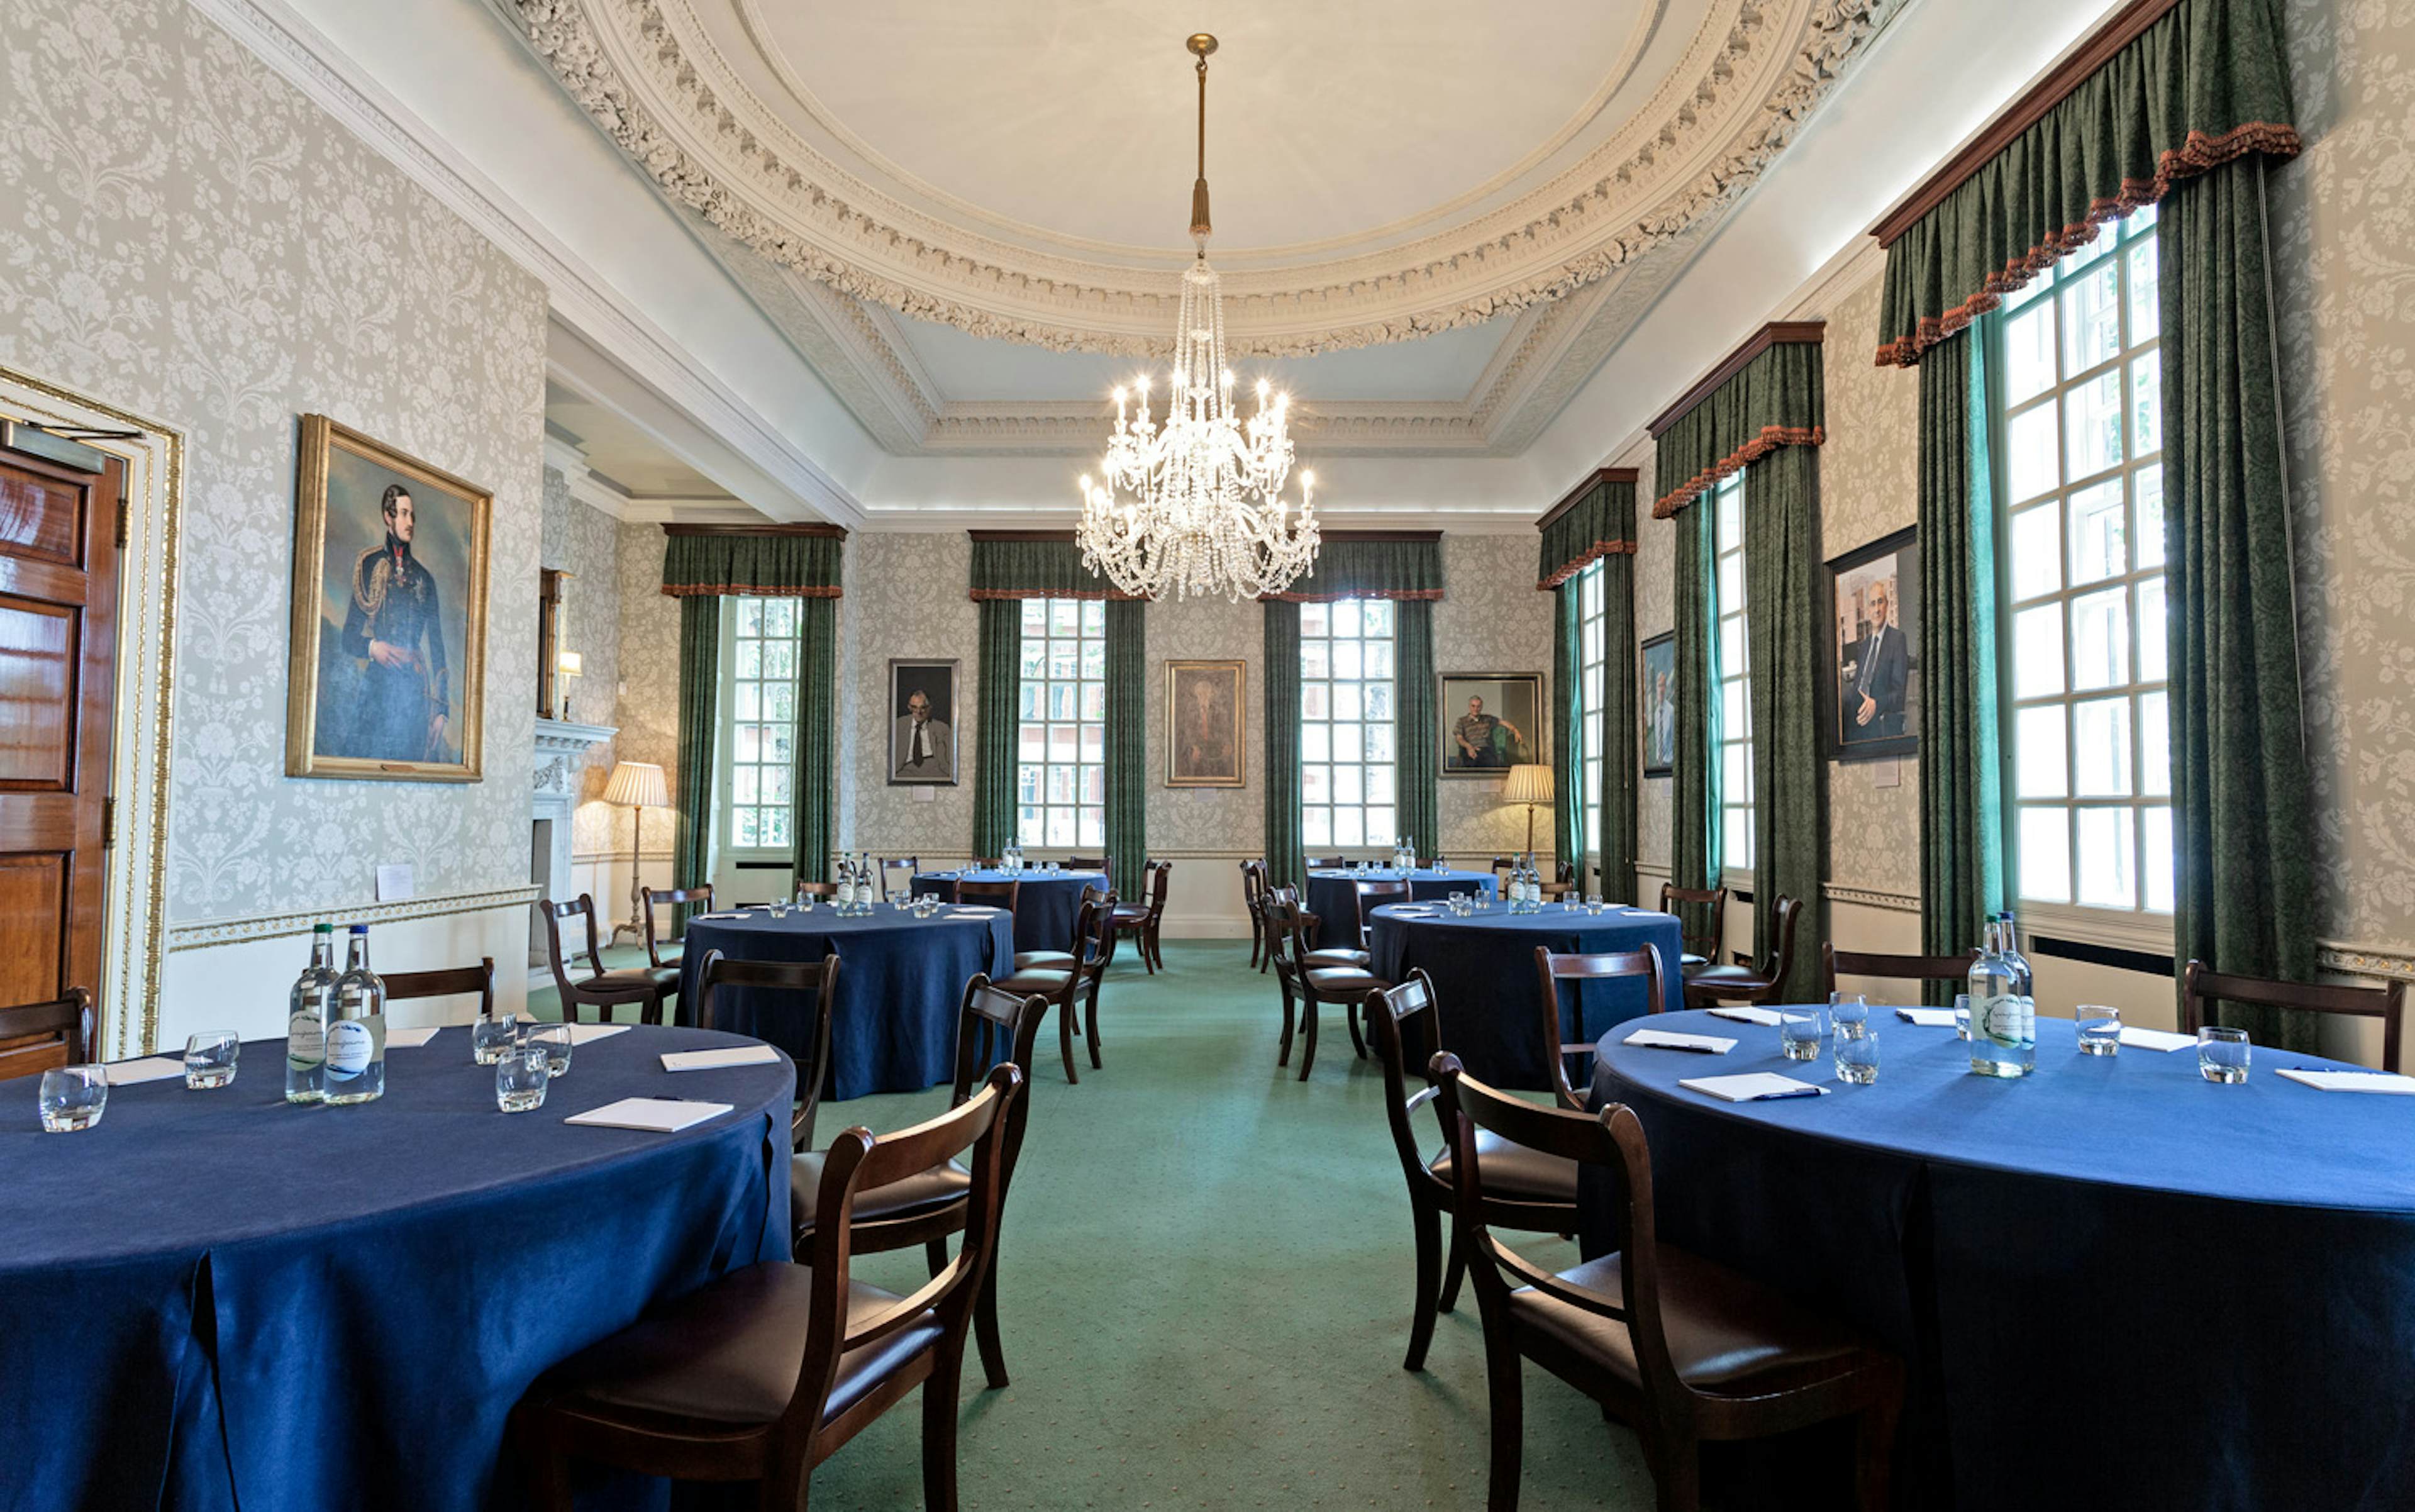 Imperial Venues - 170 Queen's Gate  - The Council Room image 1